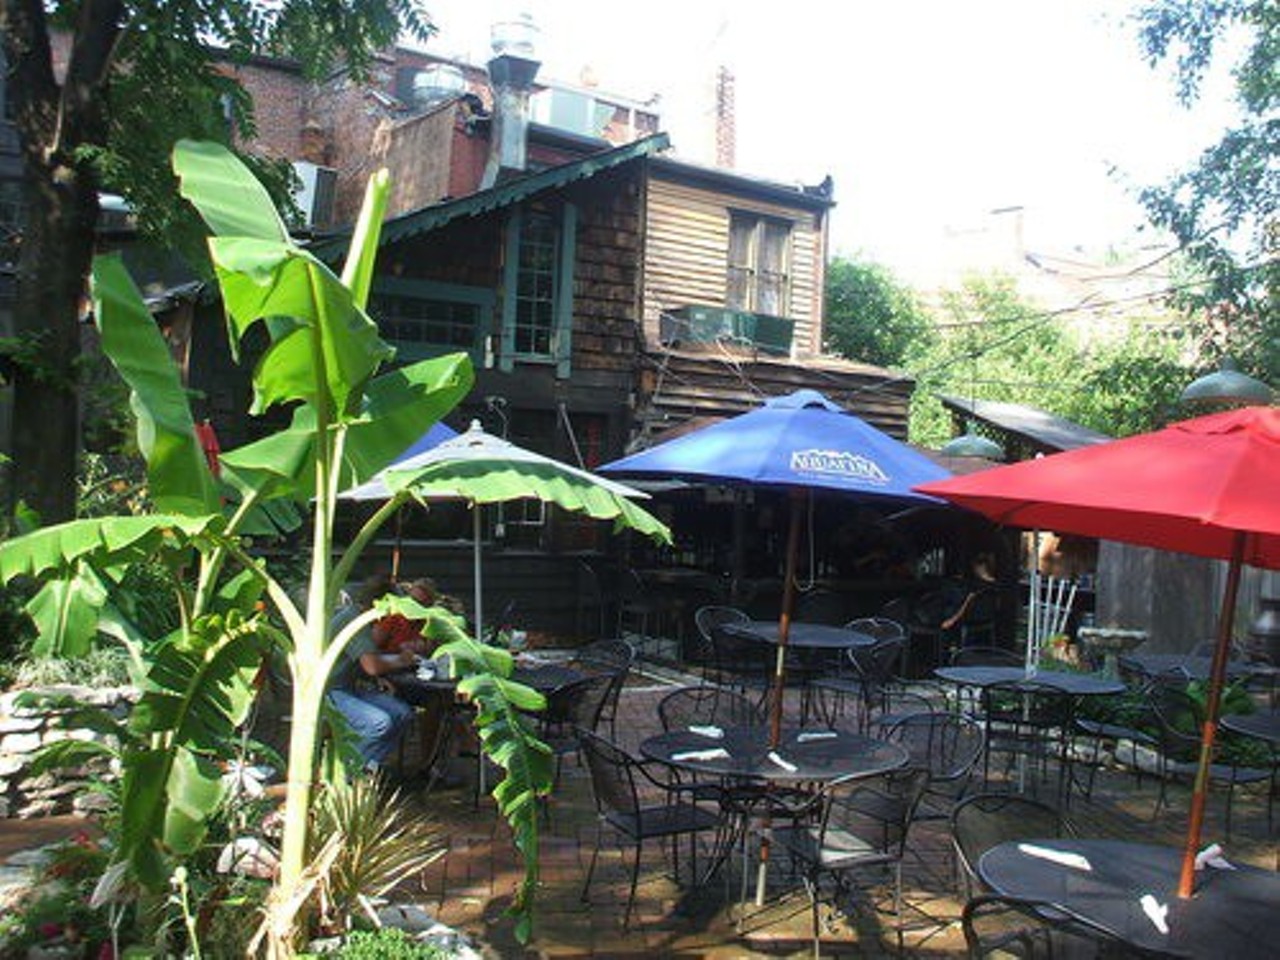 Molly&#146;s in Soulard
816 Geyer Ave.
St. Louis, MO 63104
(314) 241-6200
This Soulard hotspot is a great place to go for Creole-inspired cuisine, and the patio is not to be missed. Enjoy everything from shrimp and couscous salad to double-cut roasted pork loin. Photo by Kristen Klempert.